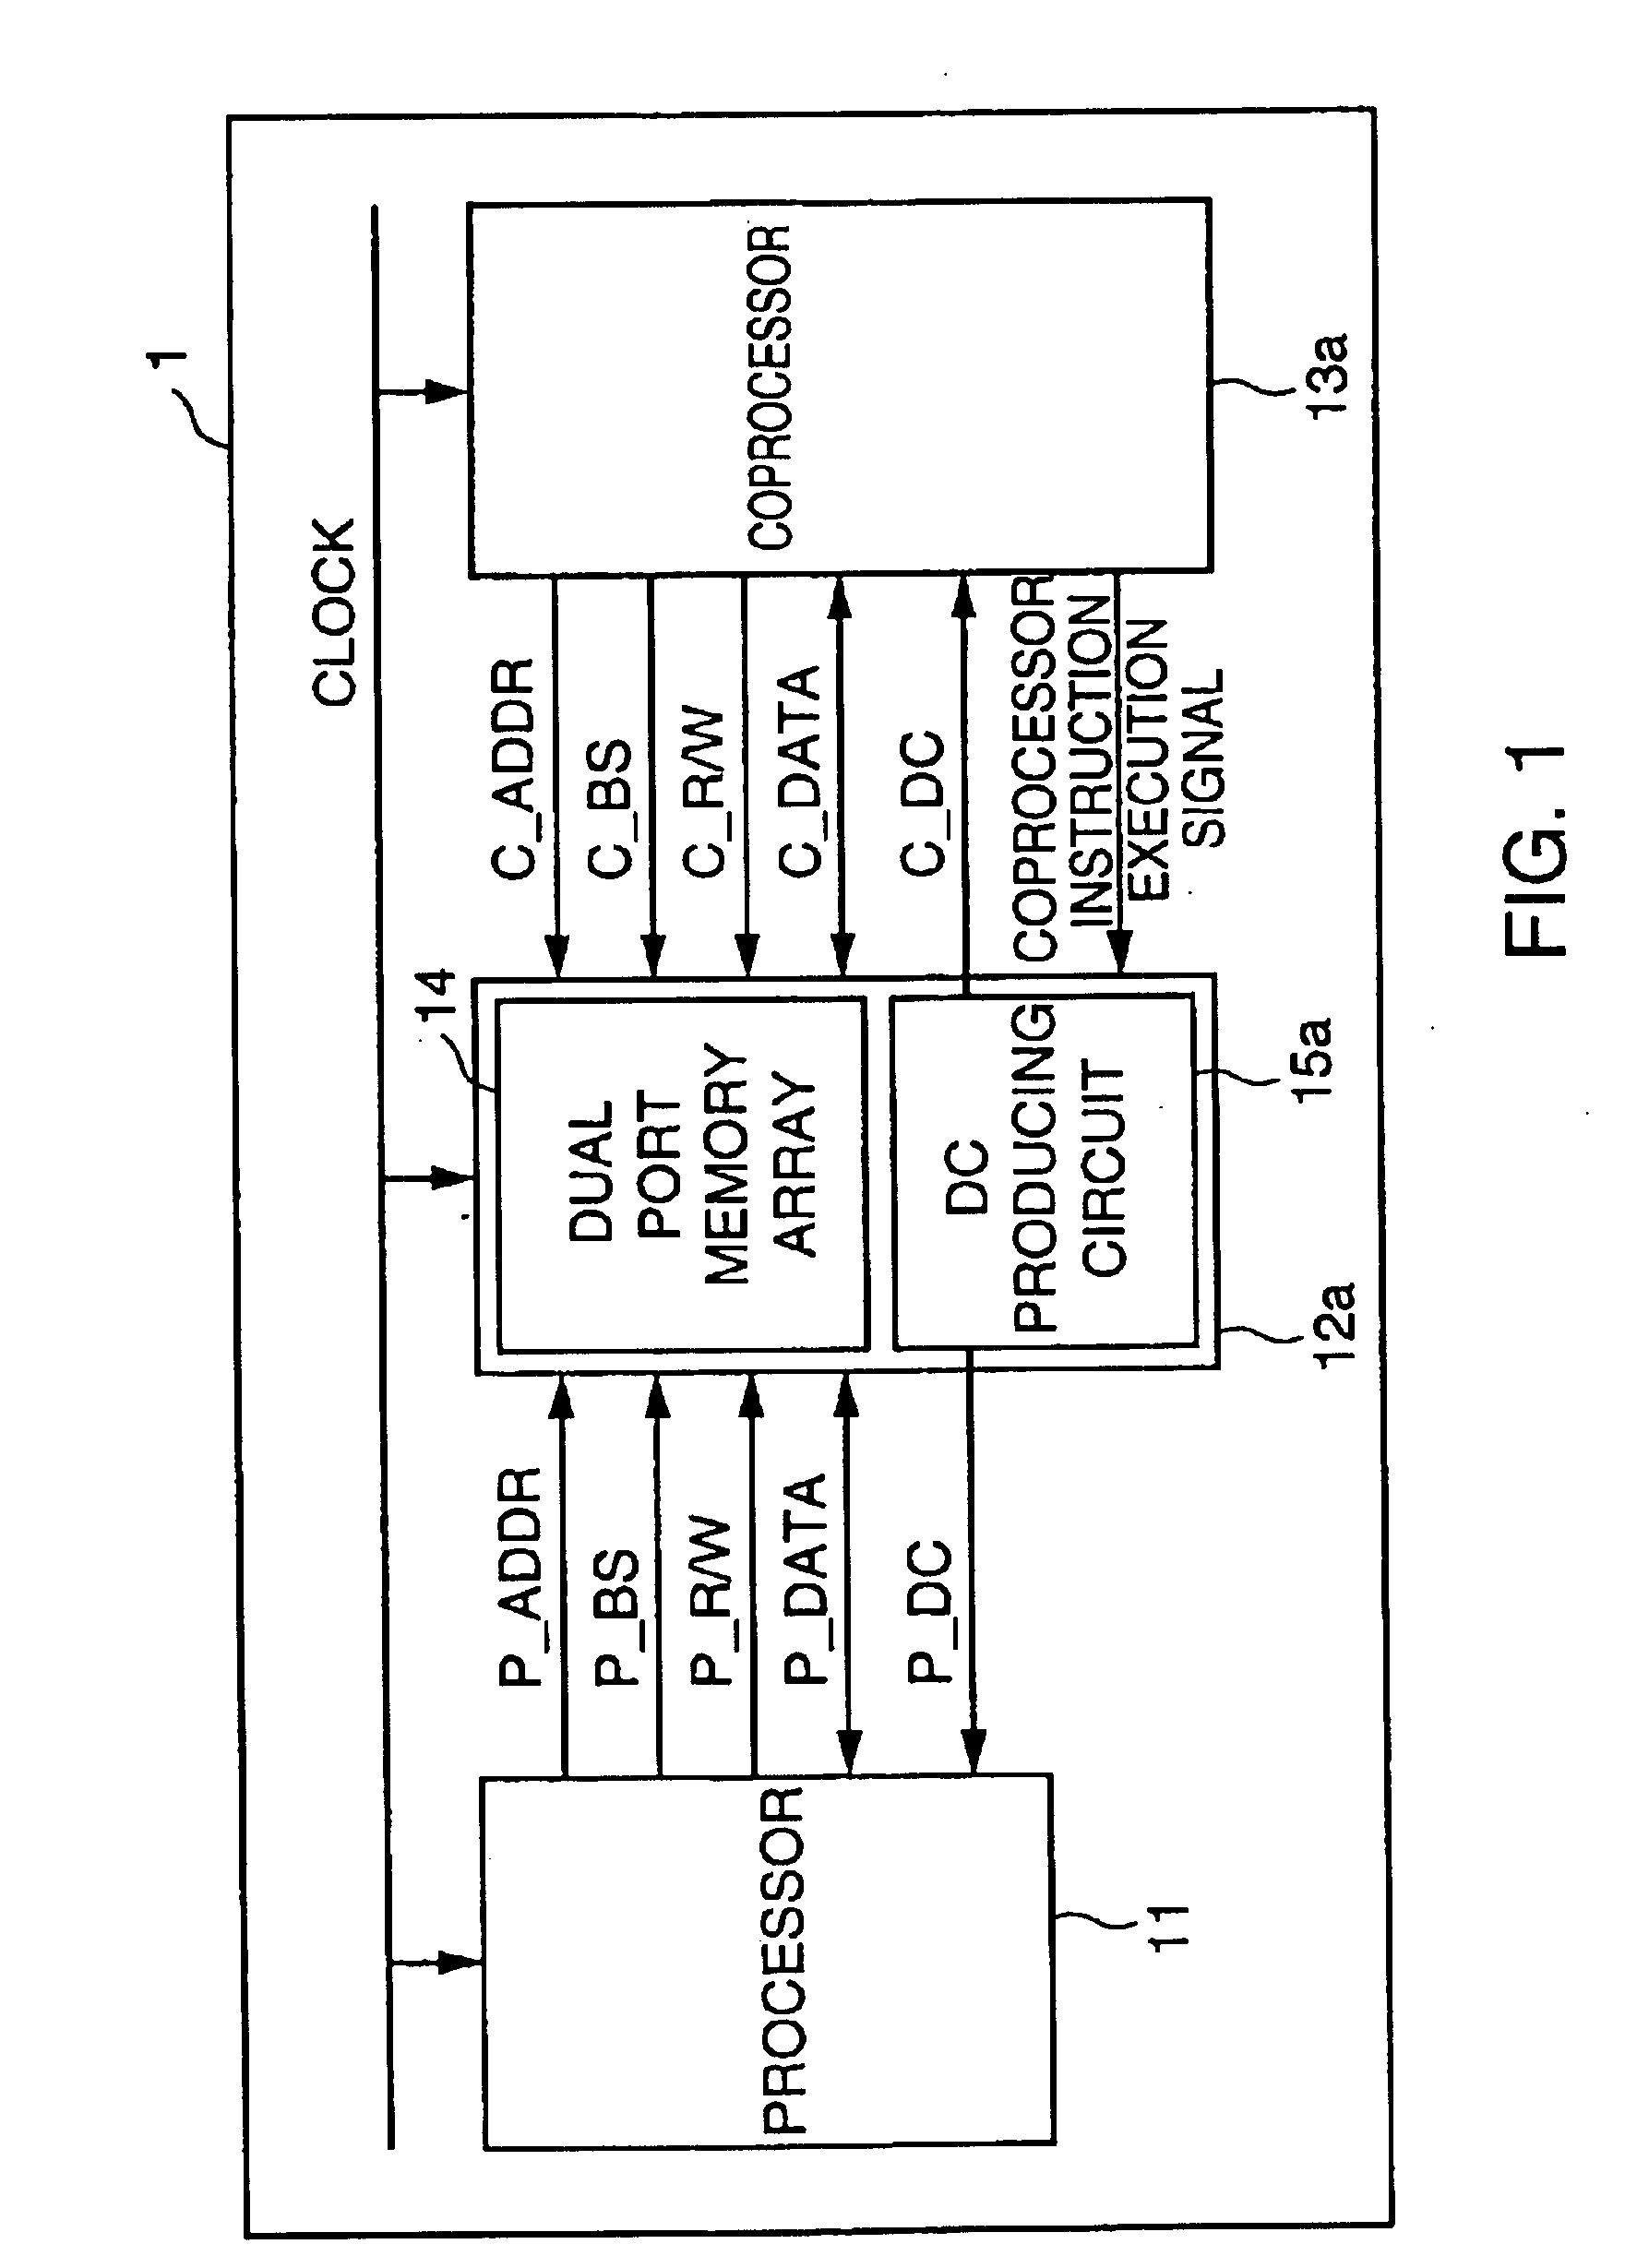 Synchronous signal producing circuit for controlling a data ready signal indicative of end of access to a shared memory and thereby controlling synchronization between processor and coprocessor